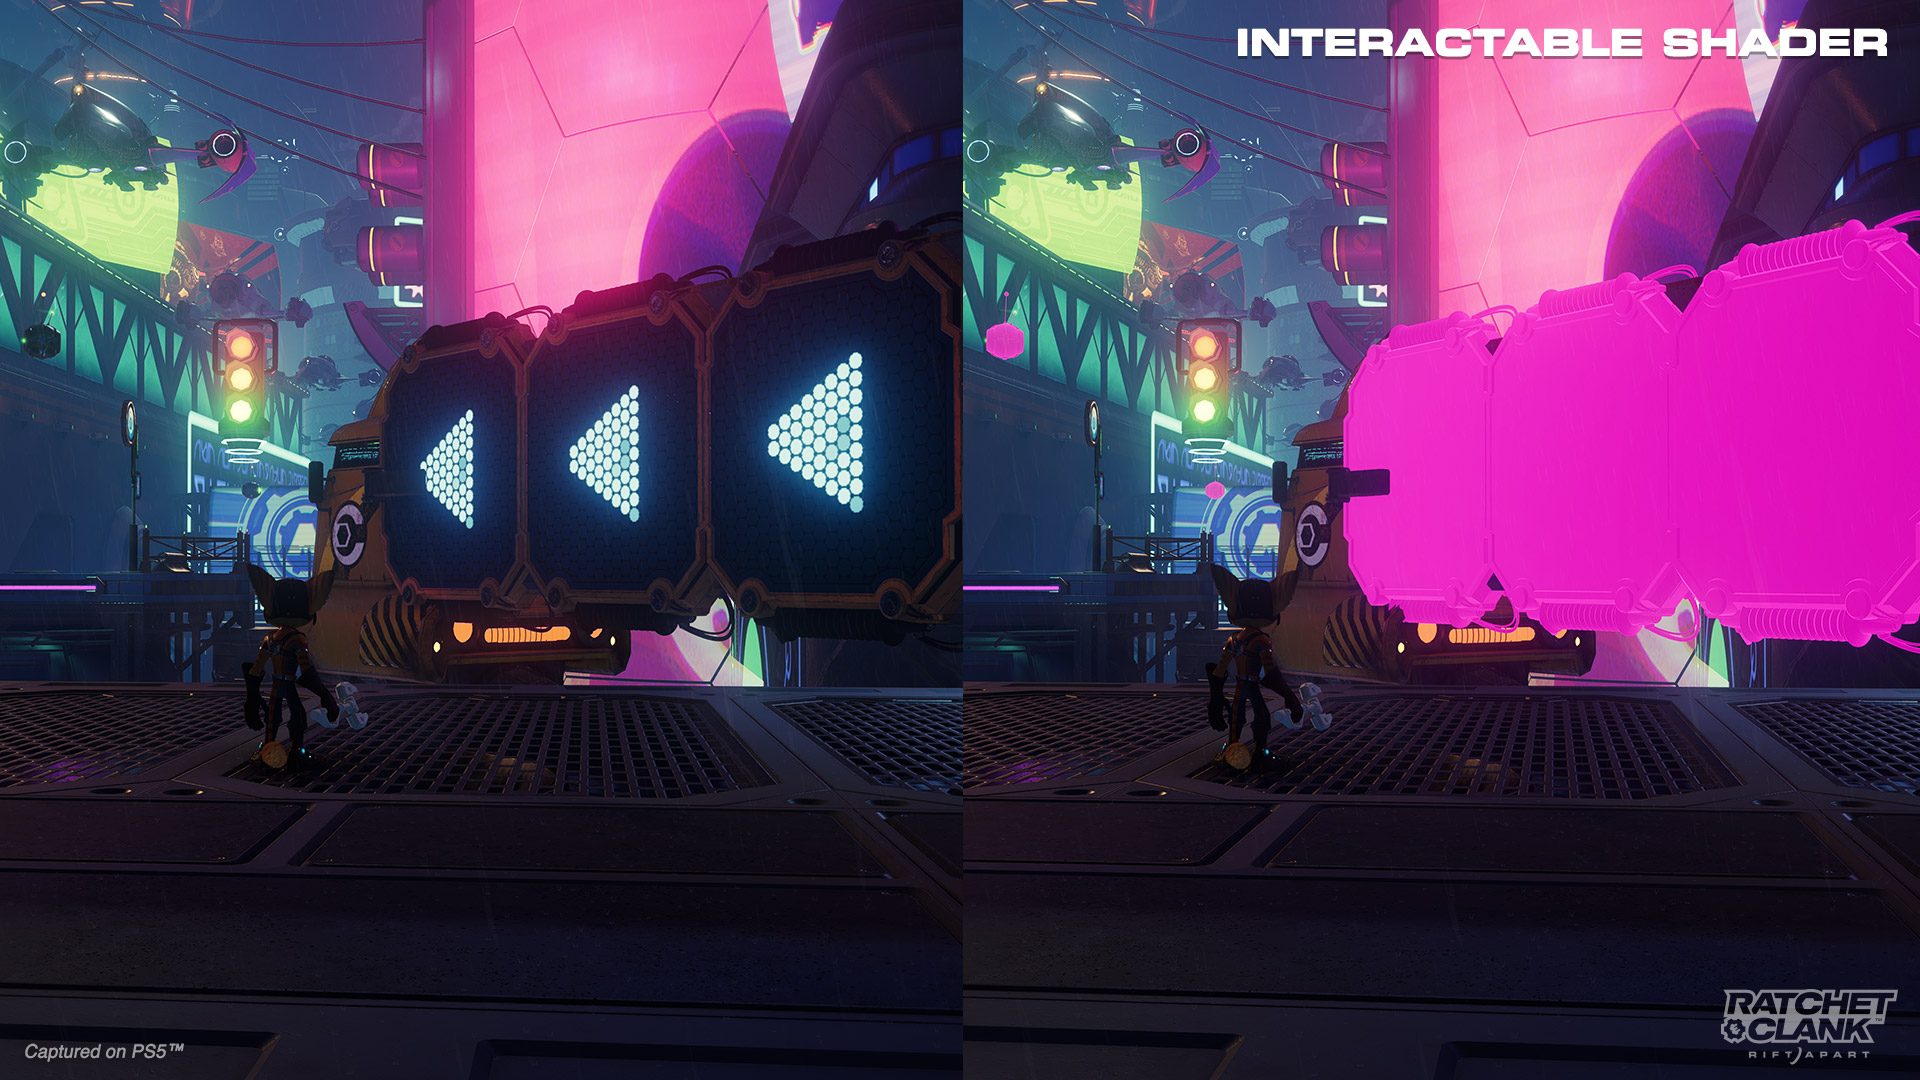 Side-by-side screenshots of Ratchet in Nefarious City lit by neon lights and signs. He is standing in front of a traversal section that includes a wall run and Versa swing target. The left side is in full color. The right has the Interactable Shader on, making the wall run and Versa swing target shaded magenta.